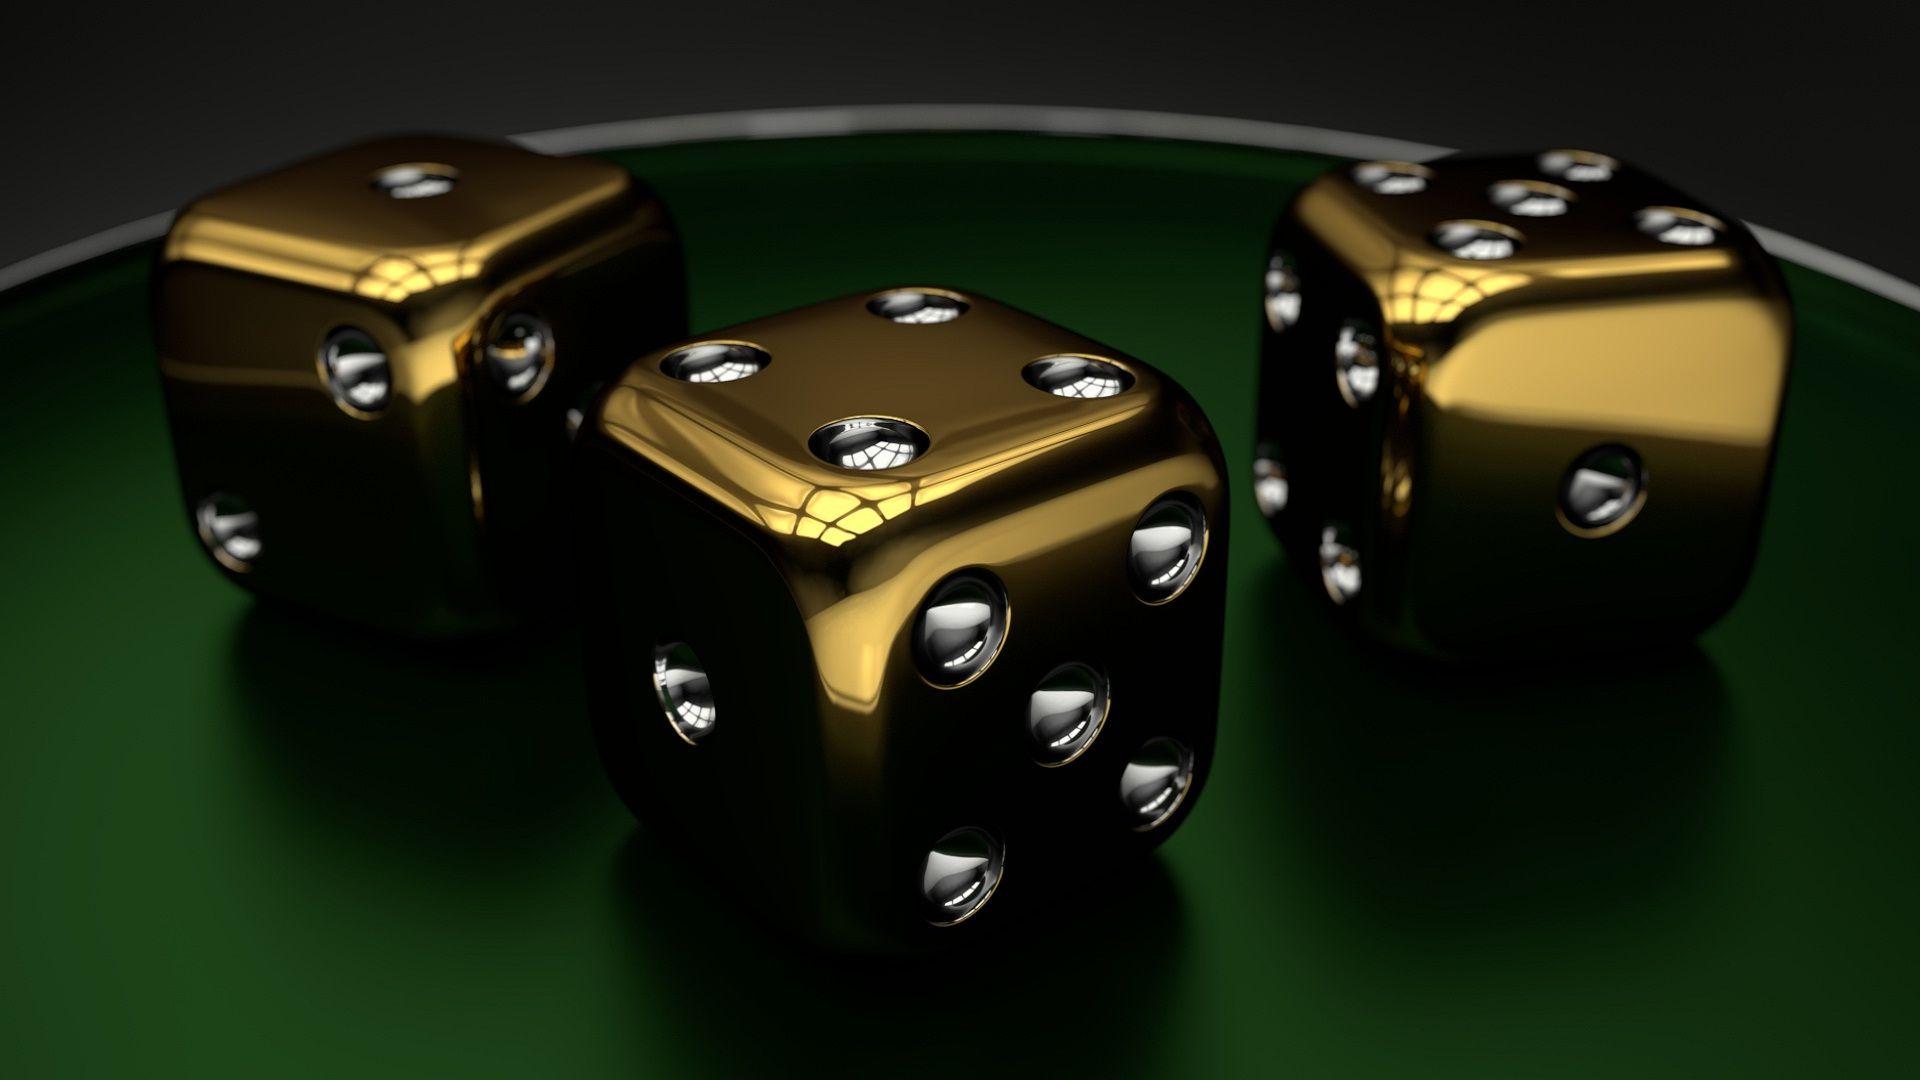 Giant dice HD 3D wallpapers.